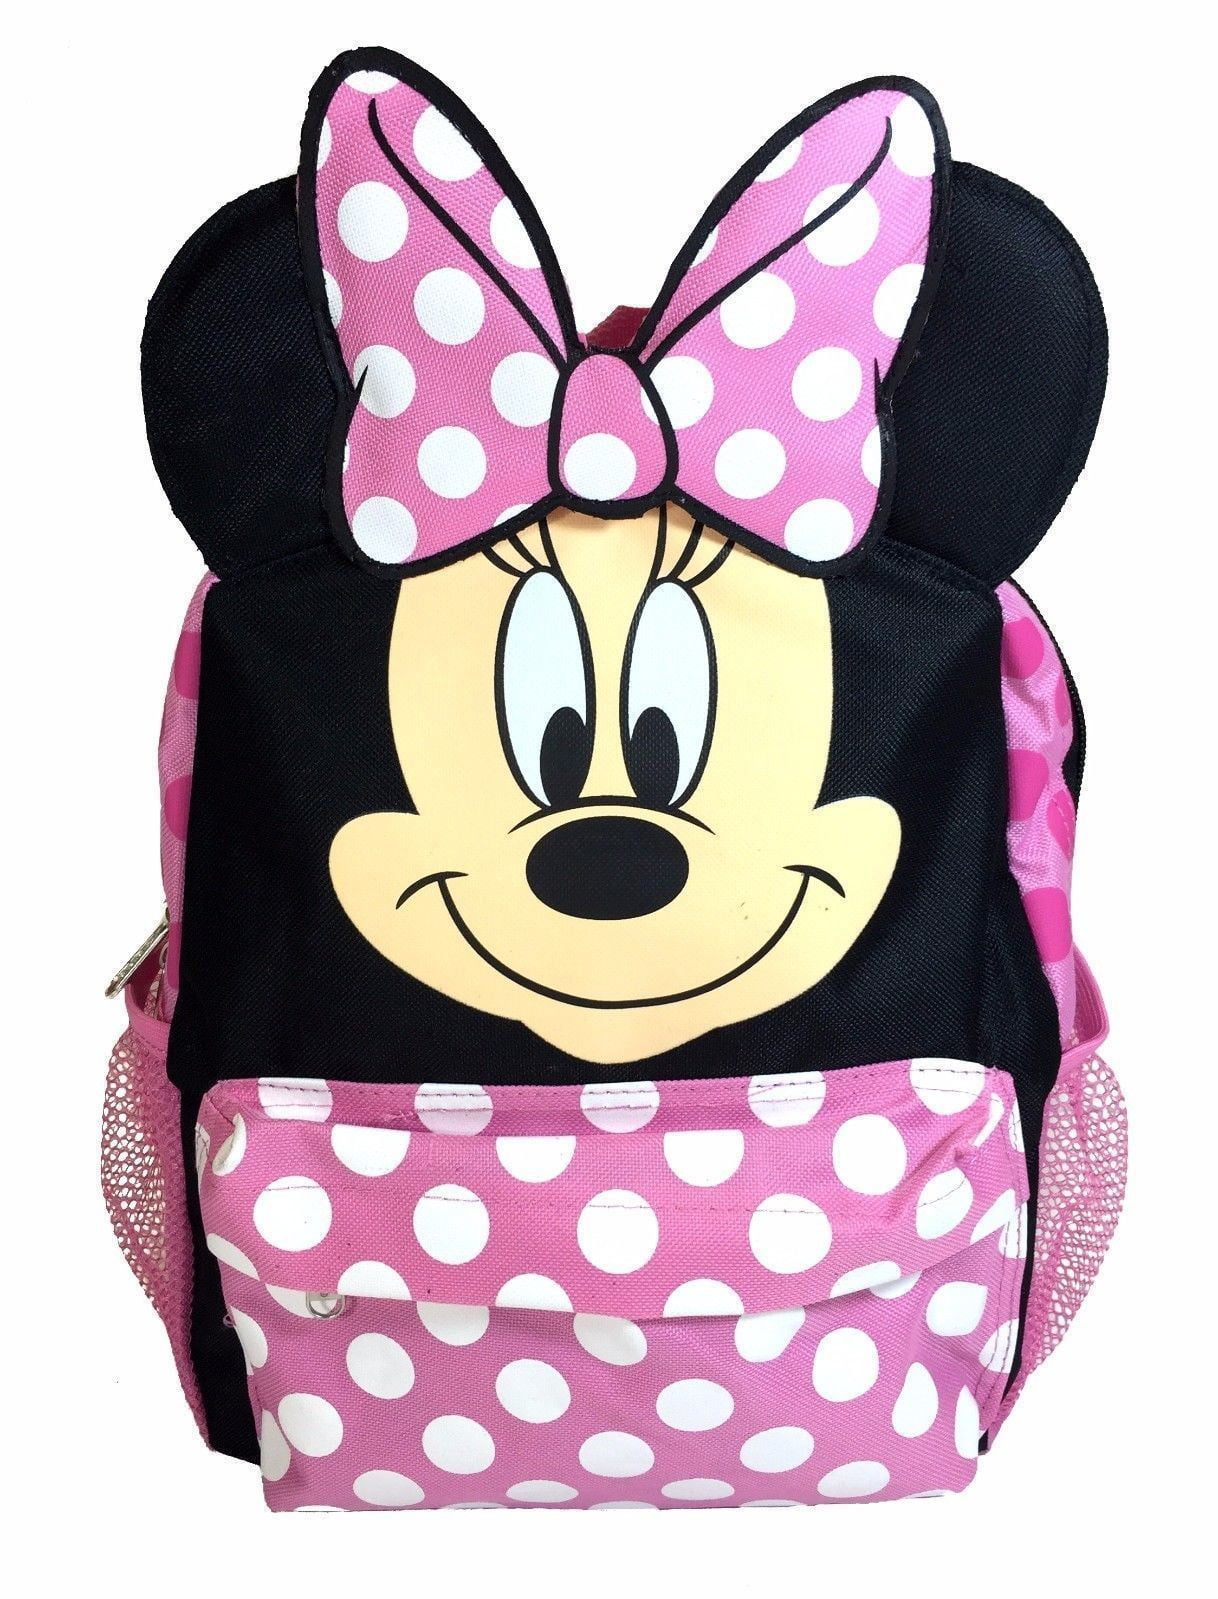 12" Disney Minnie Mouse Face Girls Backpack Small Bag with 3D Ear New 